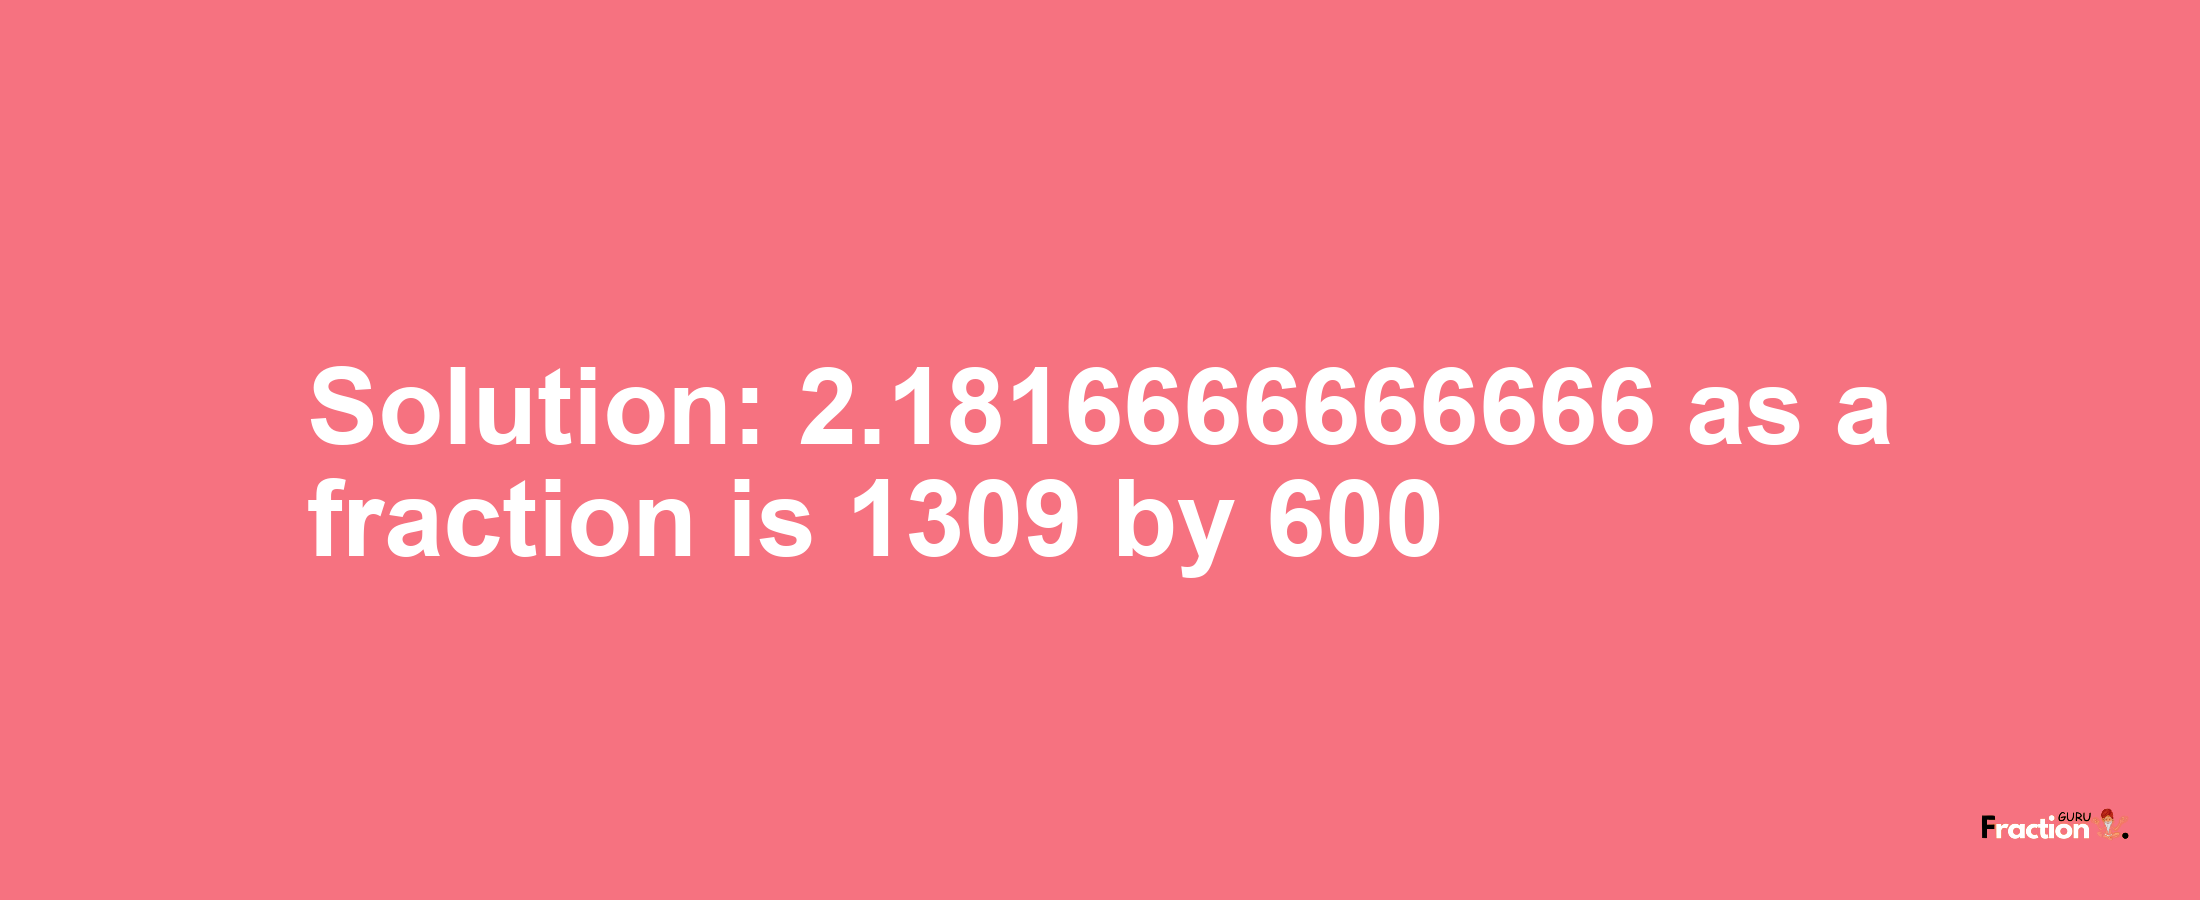 Solution:2.1816666666666 as a fraction is 1309/600